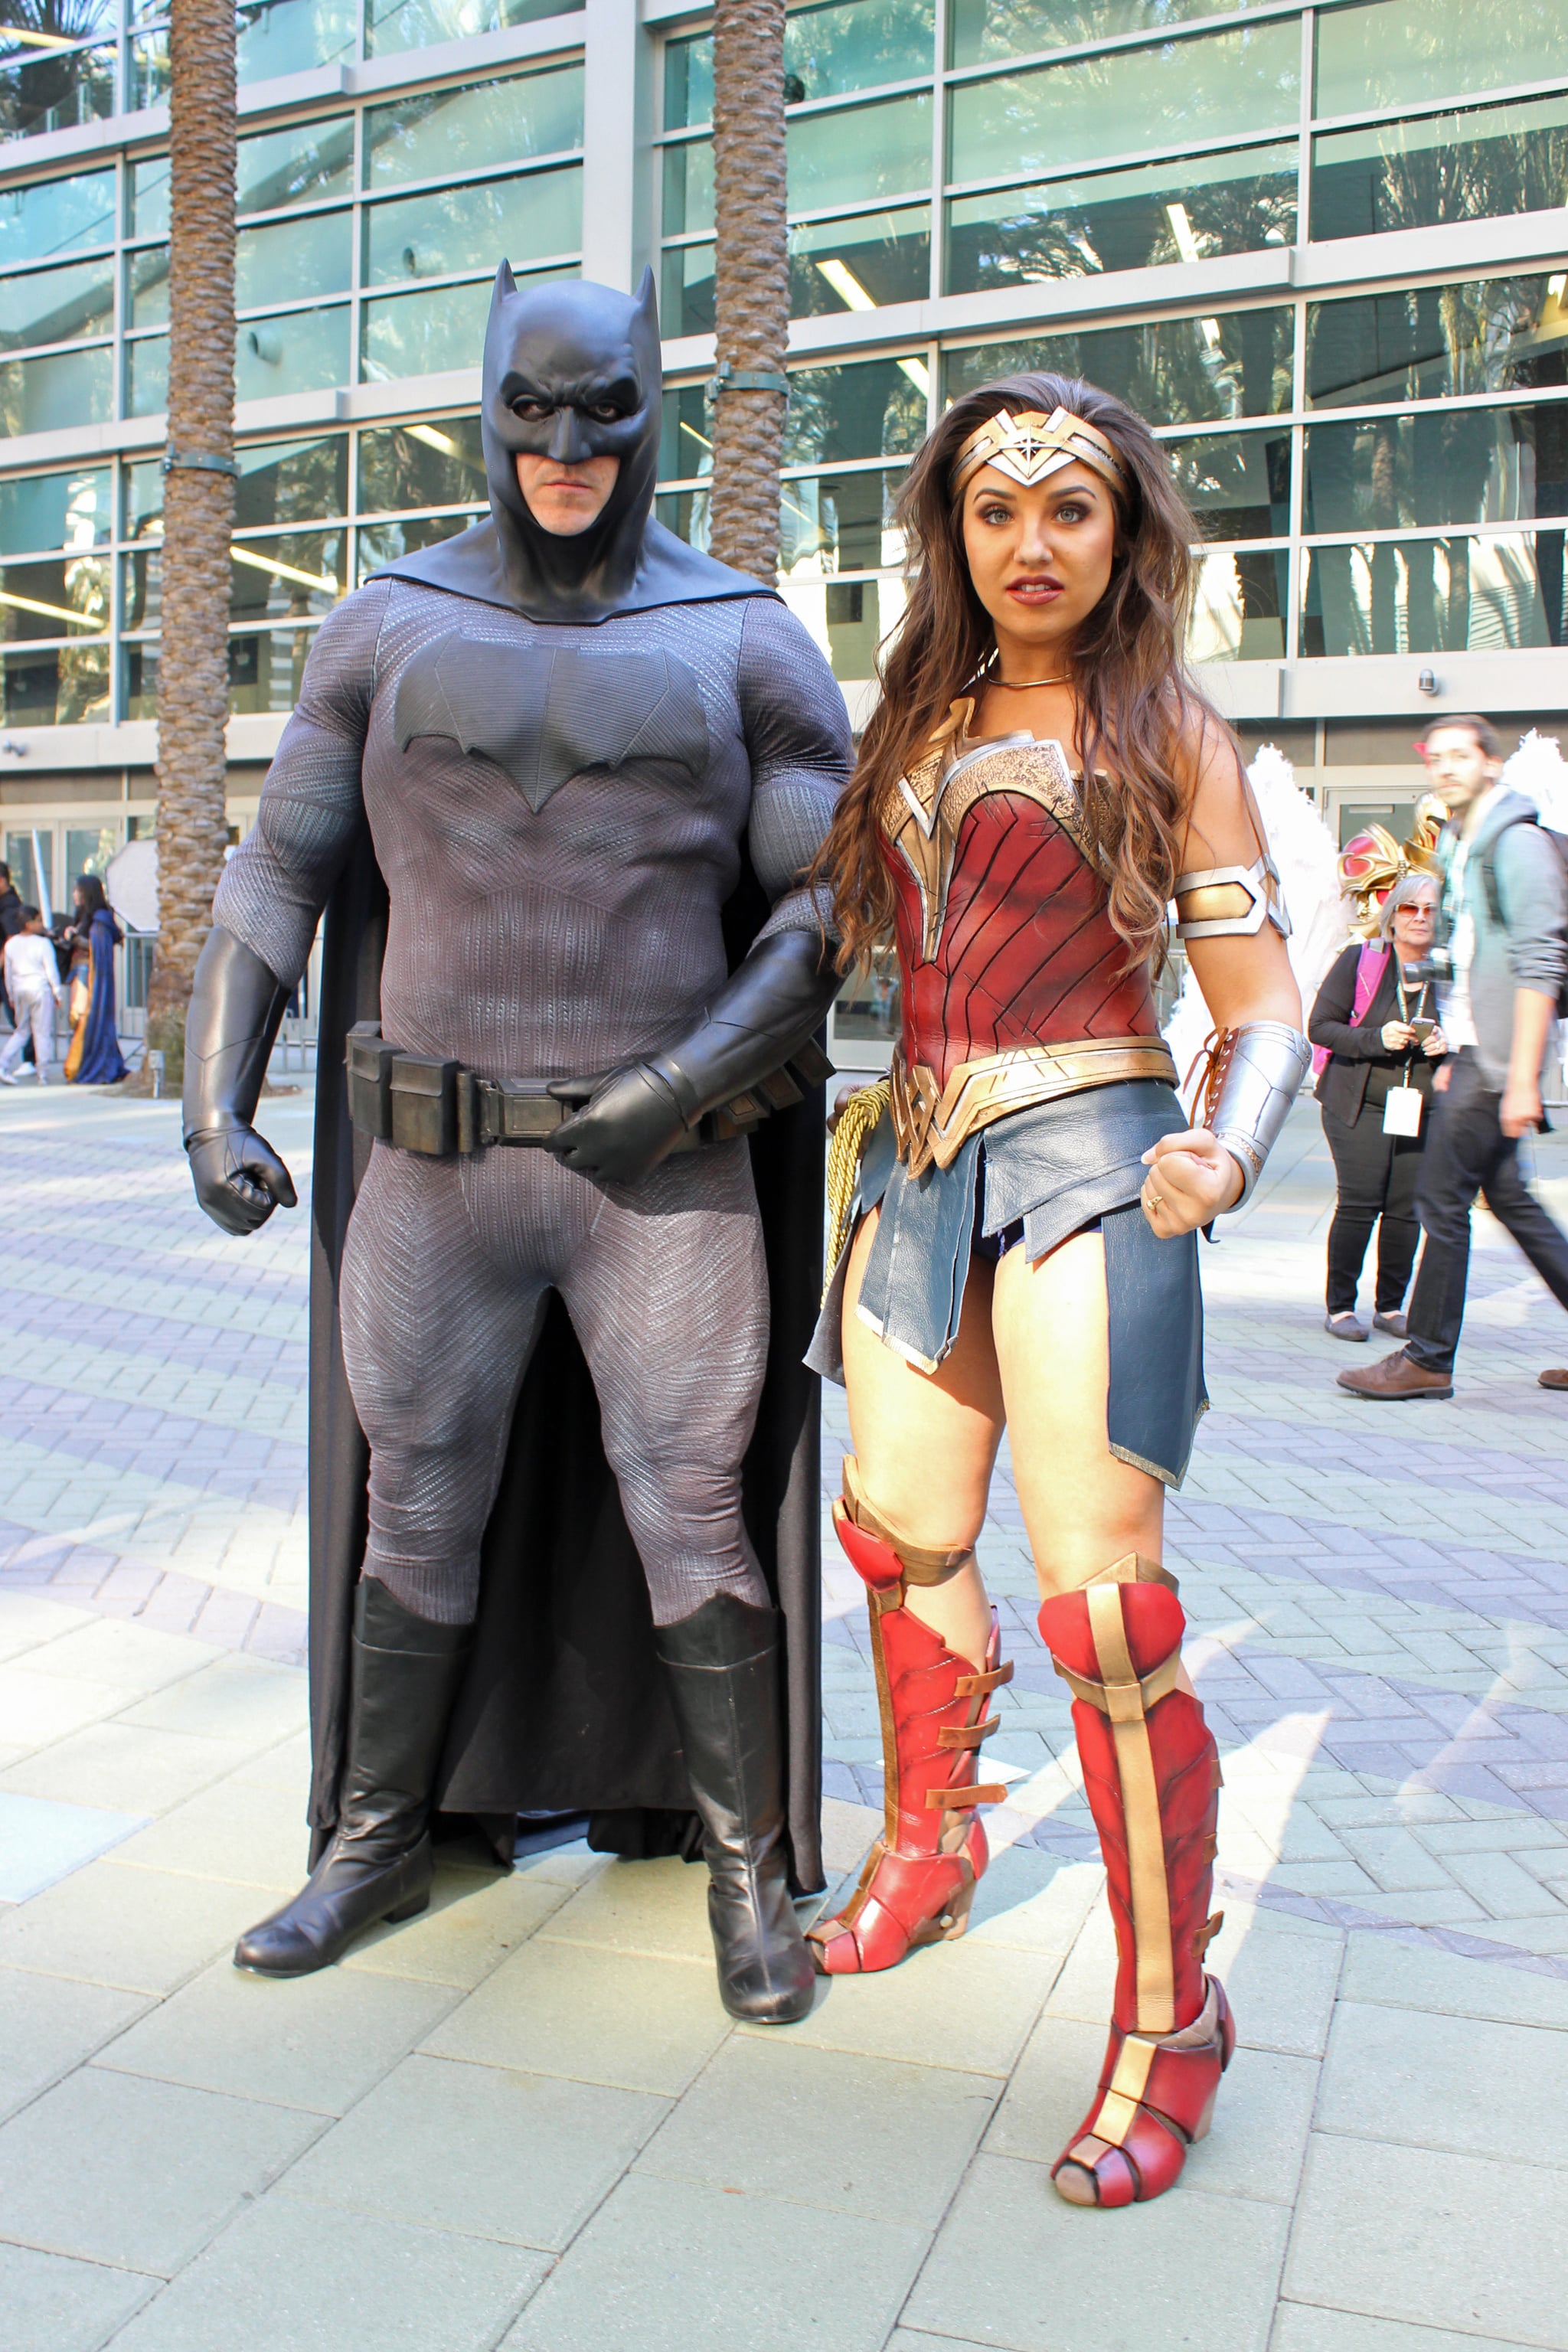 Batman And Wonder Woman Justice League These Are Hands Down The Most Incredible Cosplays From Wondercon Popsugar Tech Photo 52